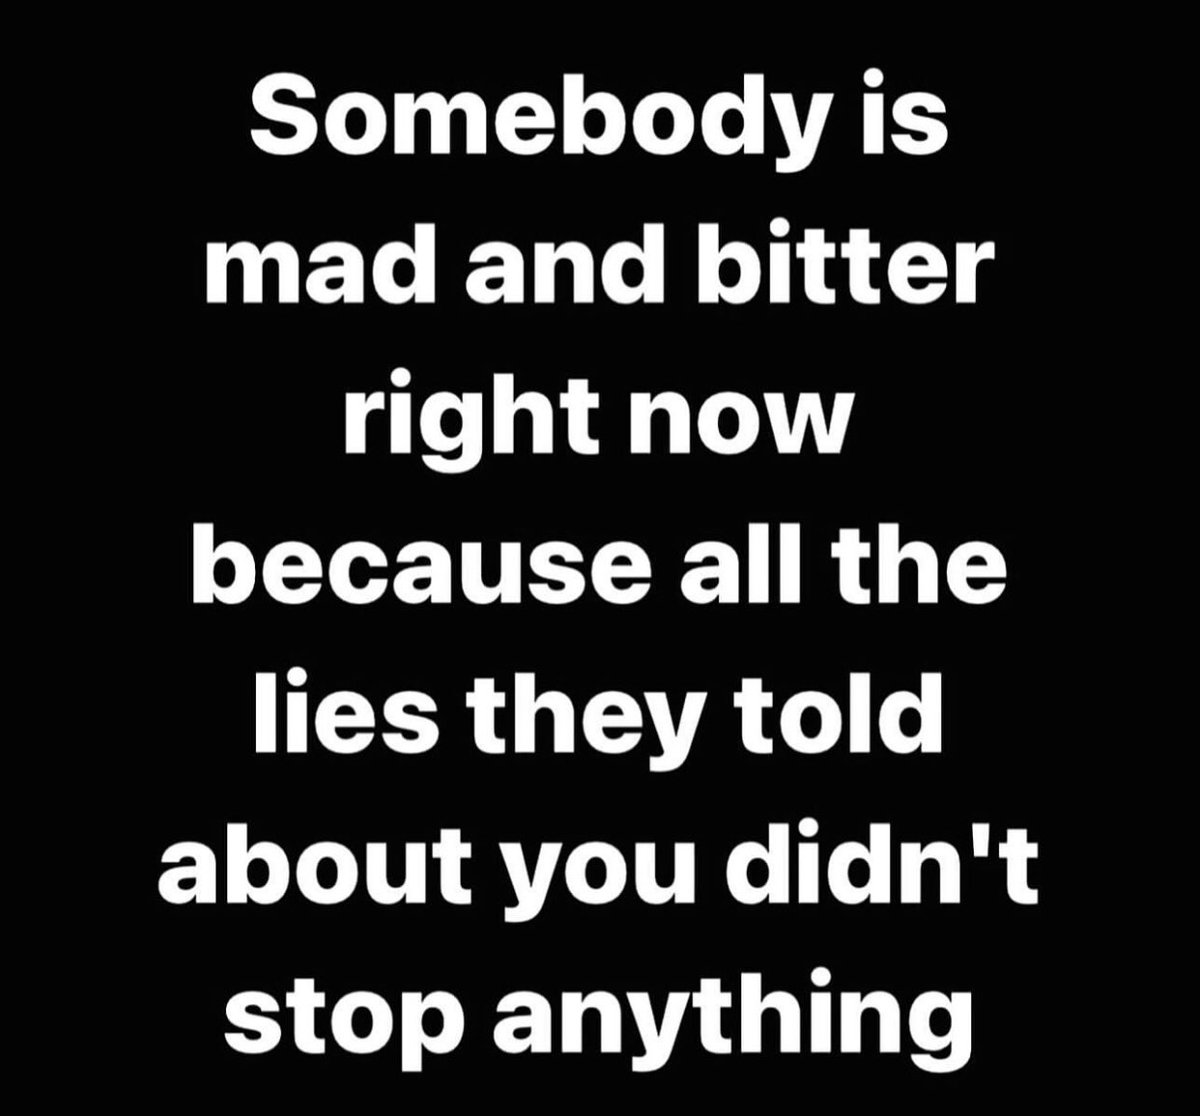 MmmHmm. 😉
Gonna have to get over it, I guess. 😘
#thecomebackcoach #liar #lies #didntwork #favor #protected #watchmerise #yasss #amen #slayallday #lifecoach #spwaaa #victorious #wink